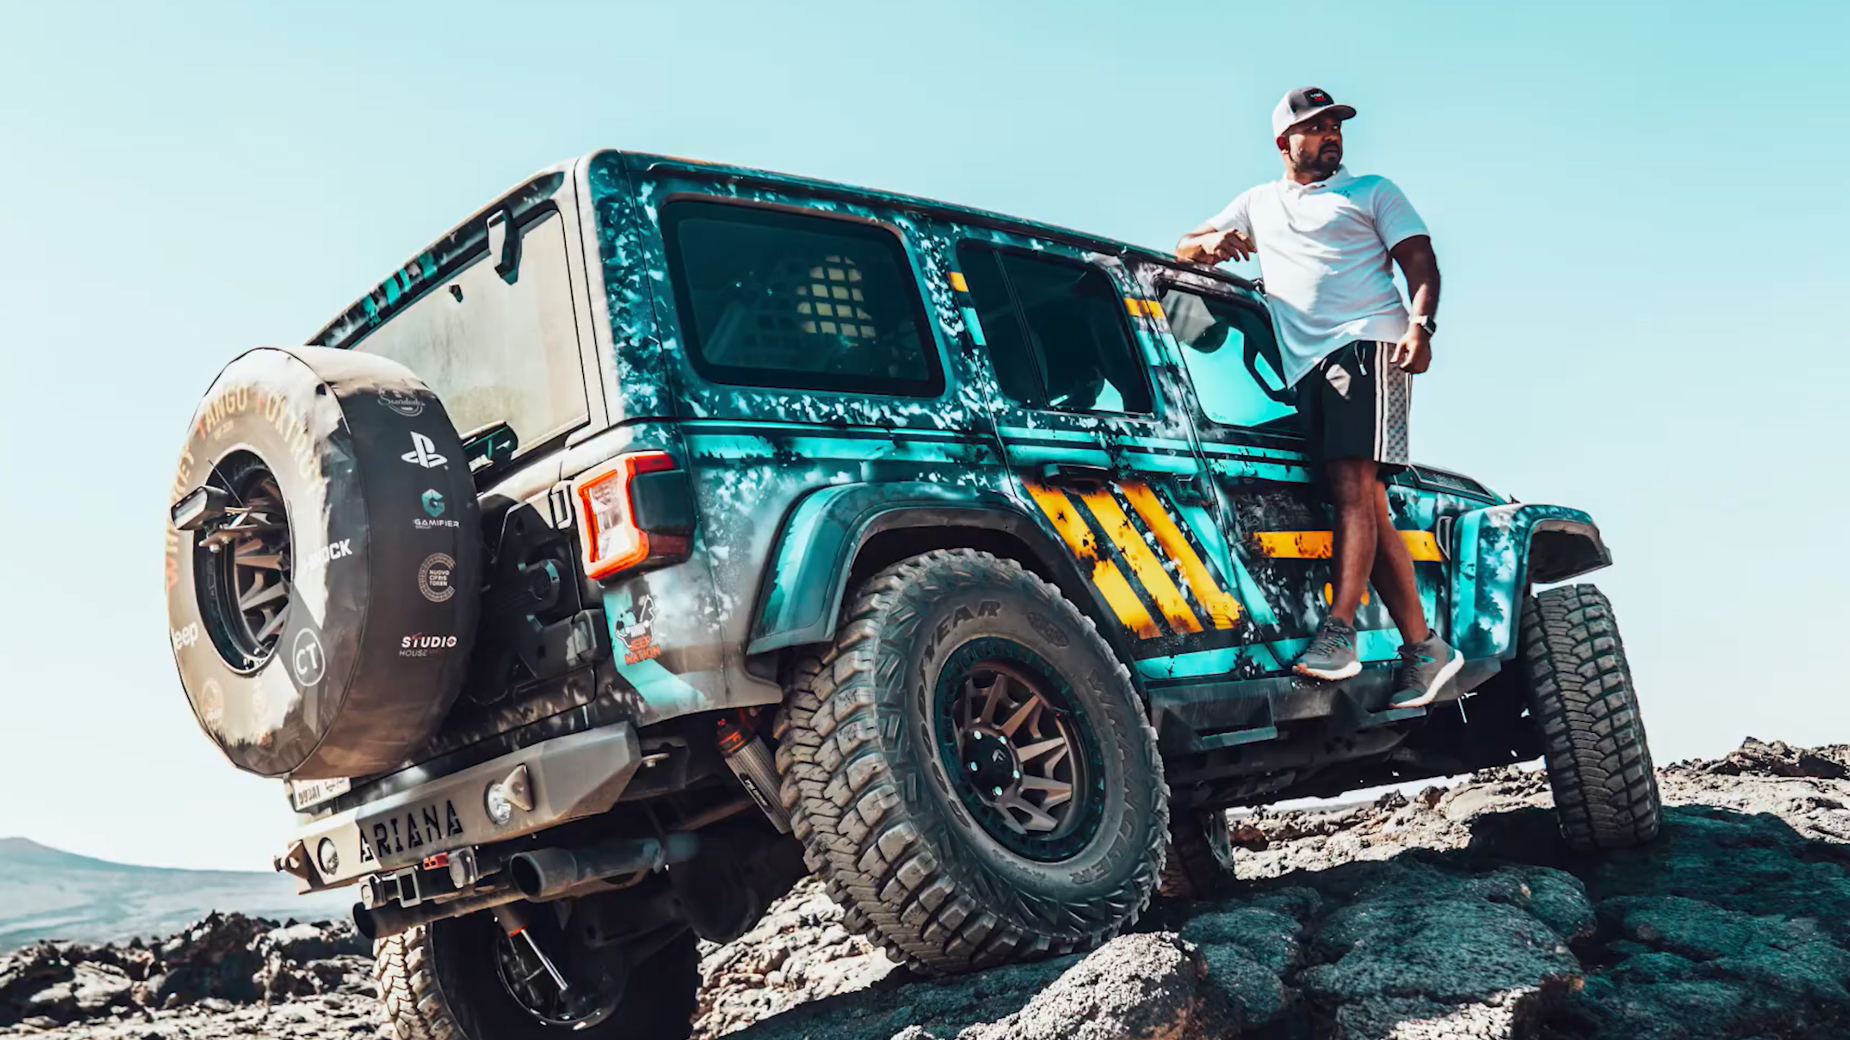 https://adgully.me/post/5297/jeep-and-publicis-middle-east-launch-we-dont-make-jeep-you-do